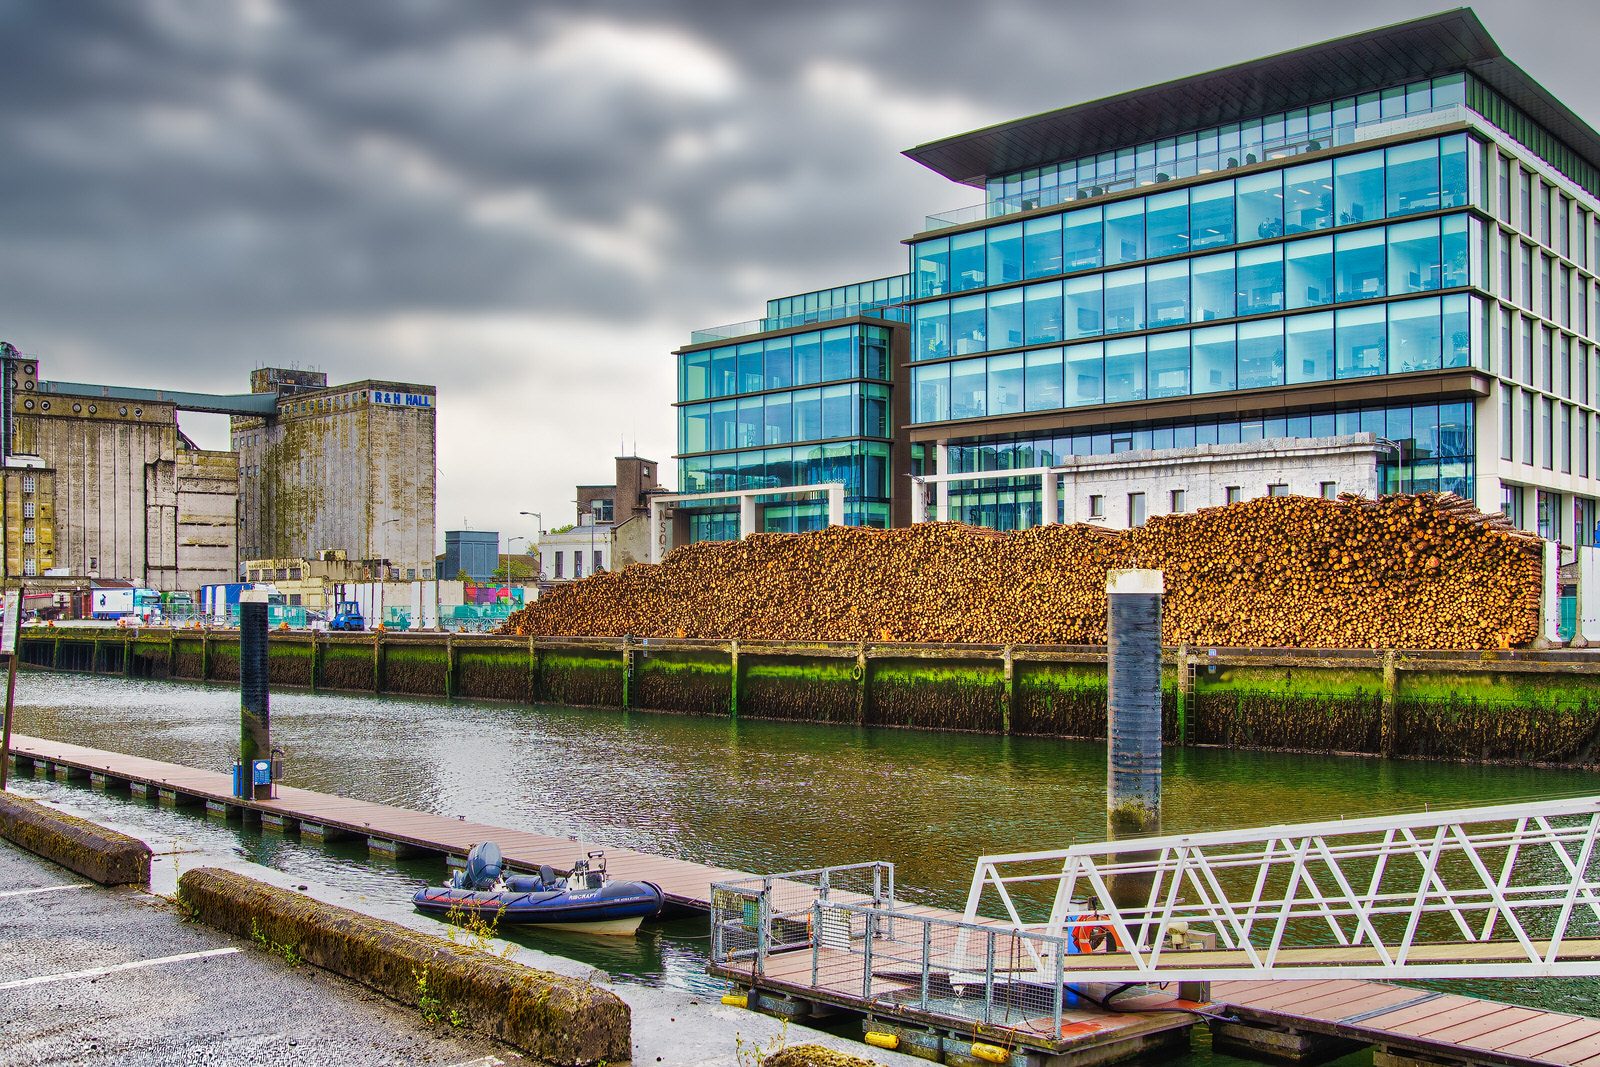 WHY WERE SO MANY LOGS STORED ON KENNEDY QUAY [CORK JULY 2022]